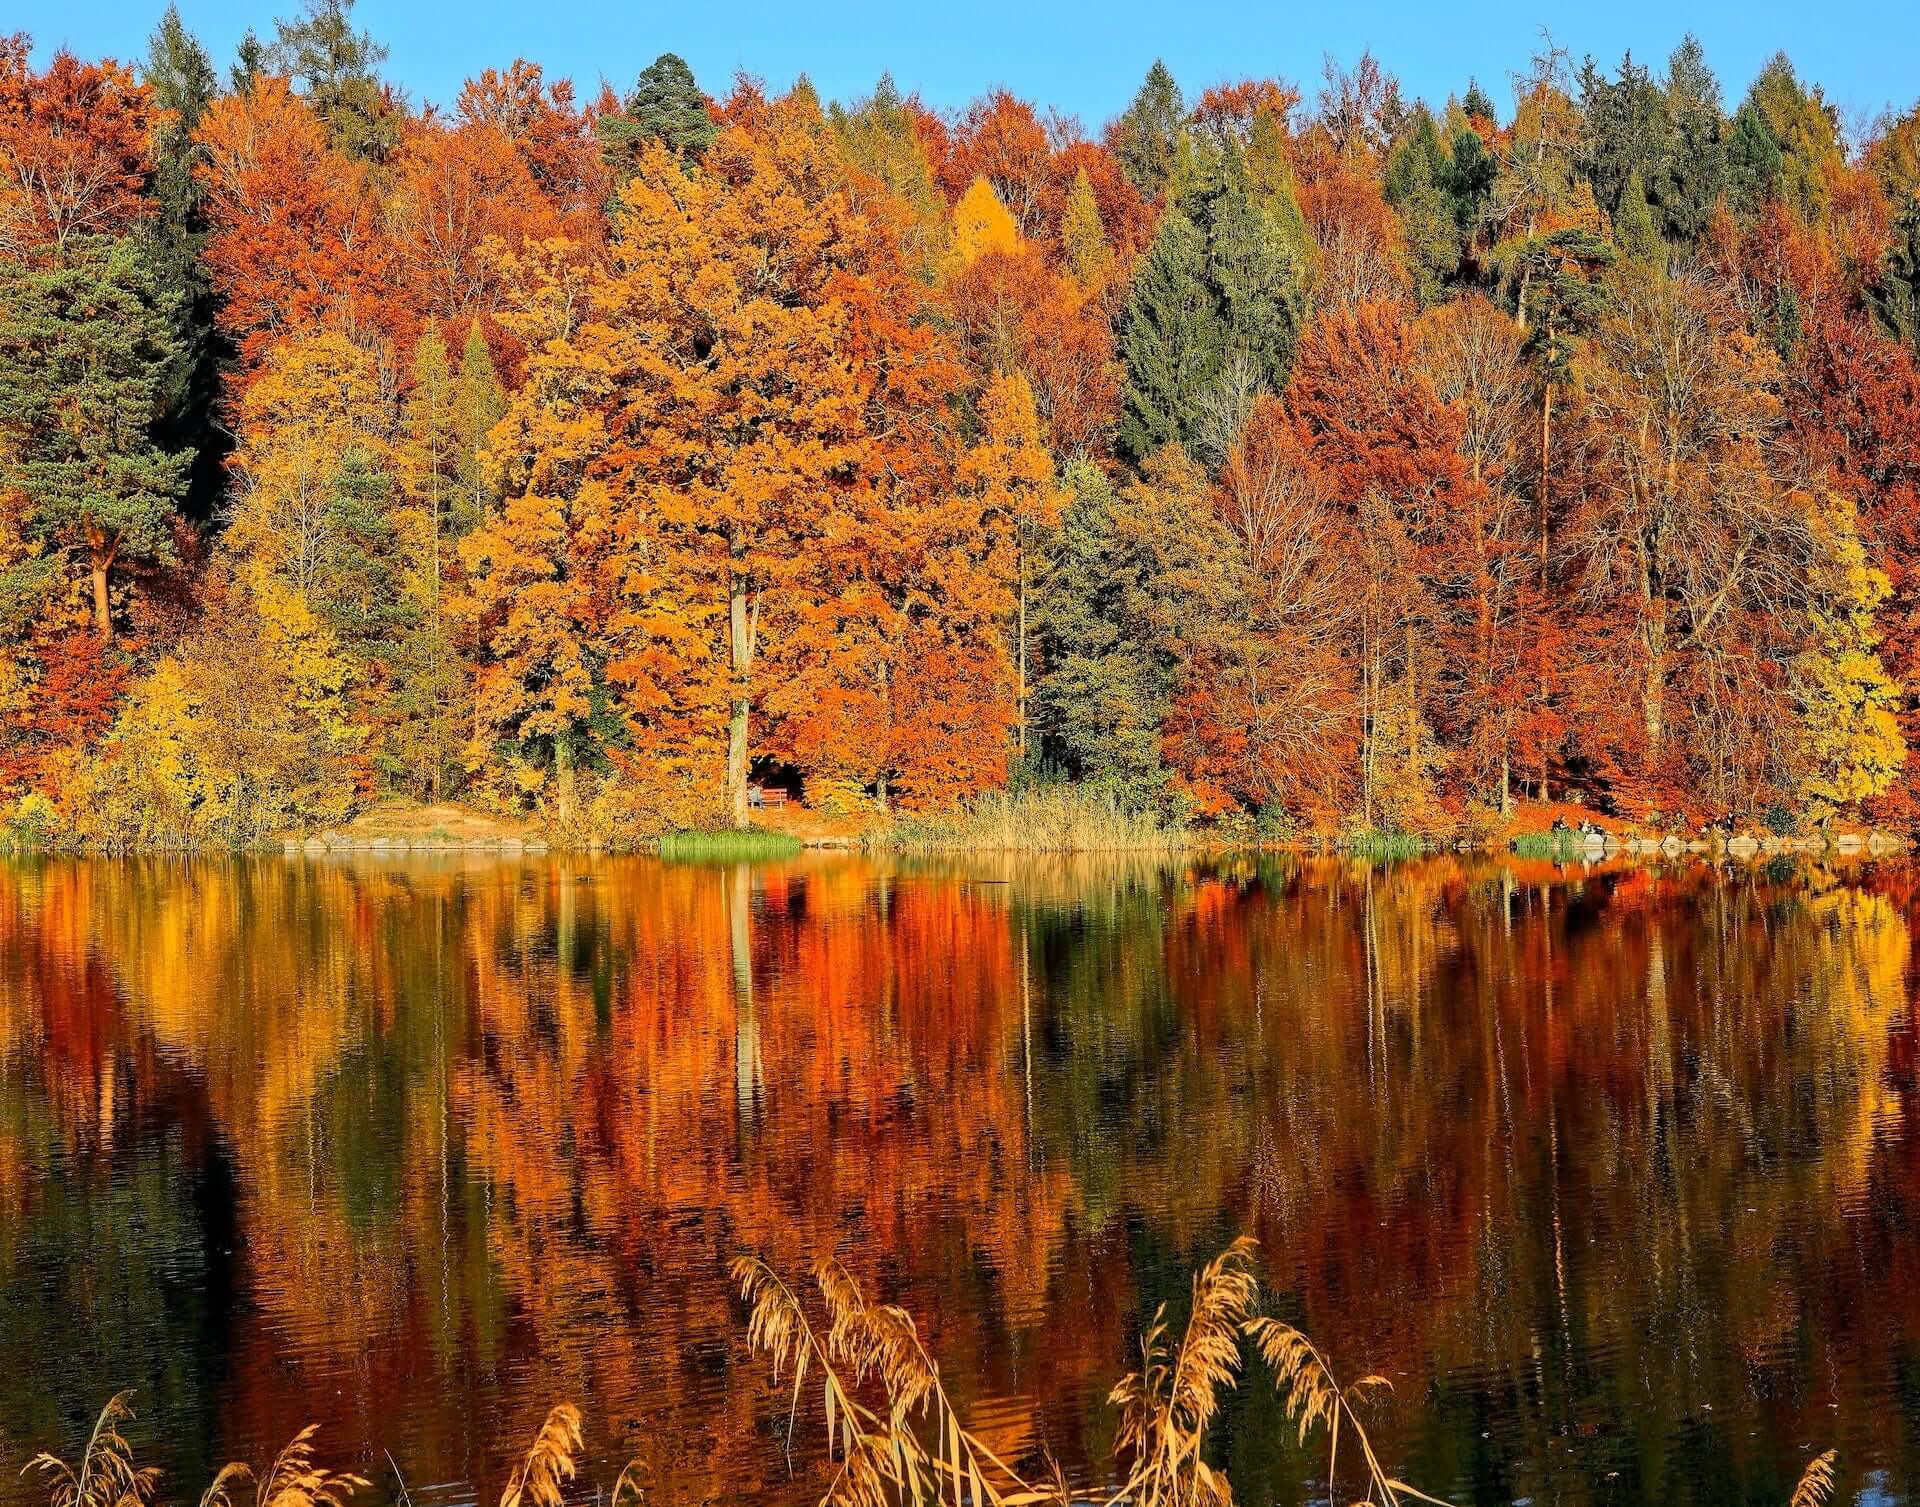 Trees with autumn leaves surrounding a lake.